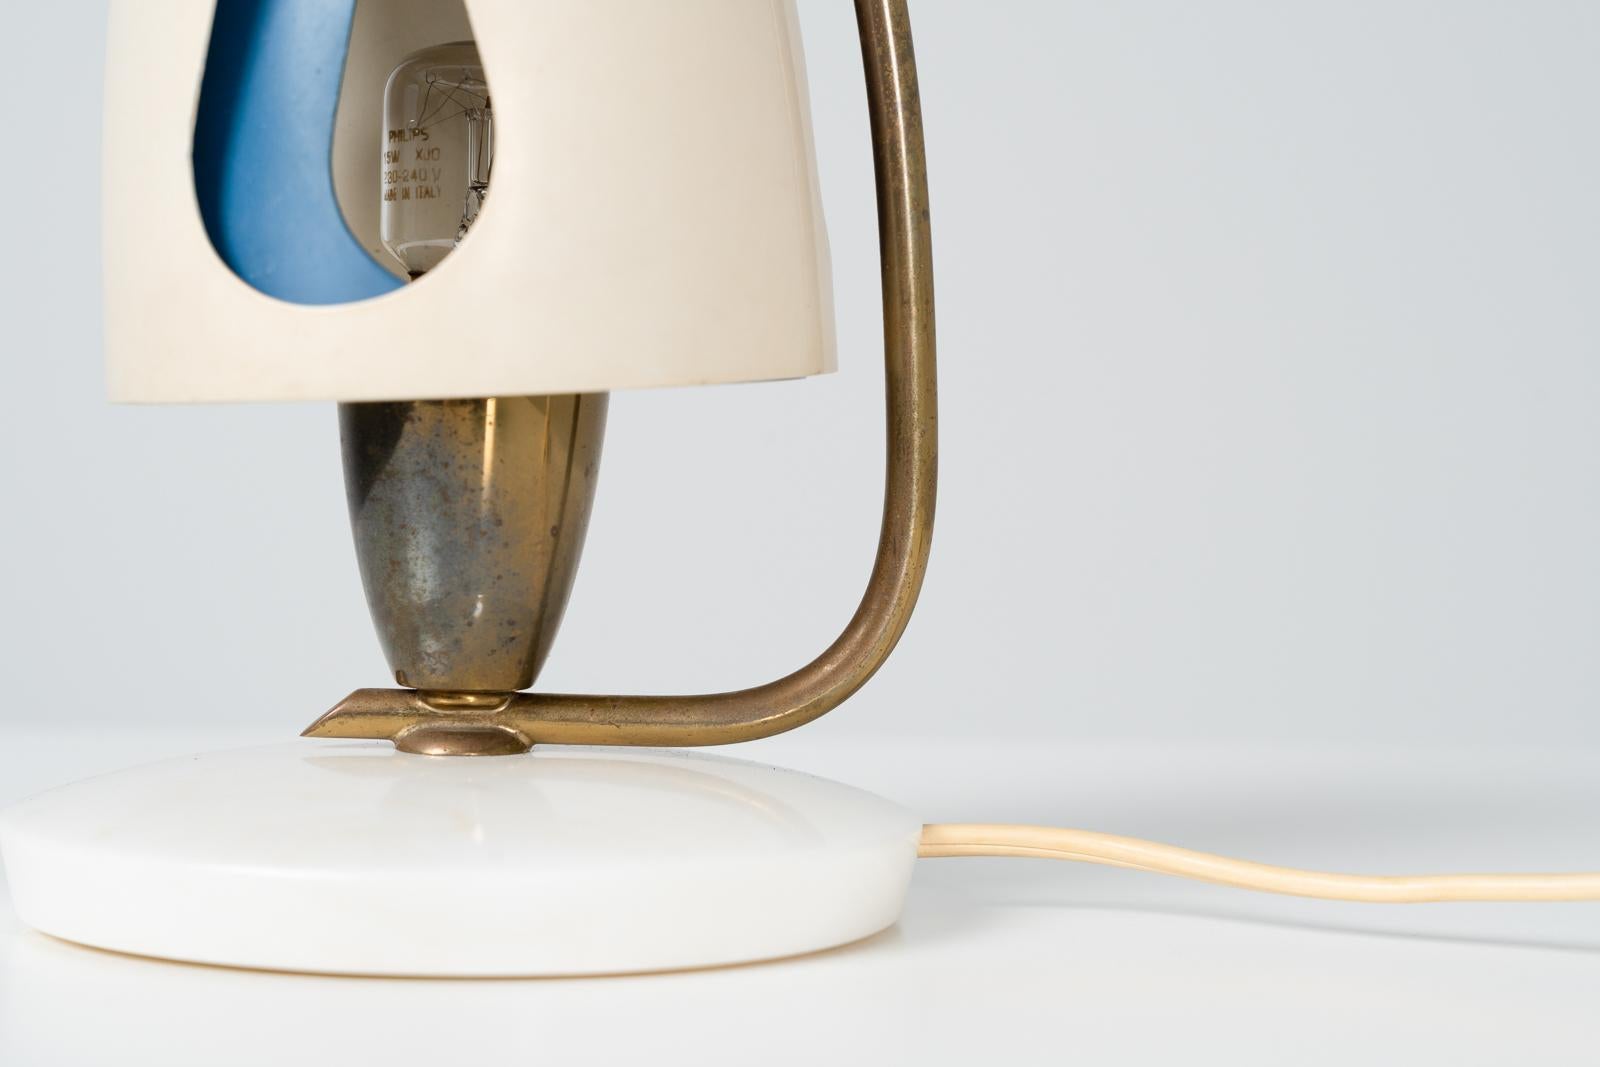 Really stunning table lamp by Angelo Lelii and manufactured by Arredoluce in 1952. The lamp itself is made of Aluminum, brass and has a marble foot. The shade can be adjusted in order to let light come through the holes, which it a very nice and